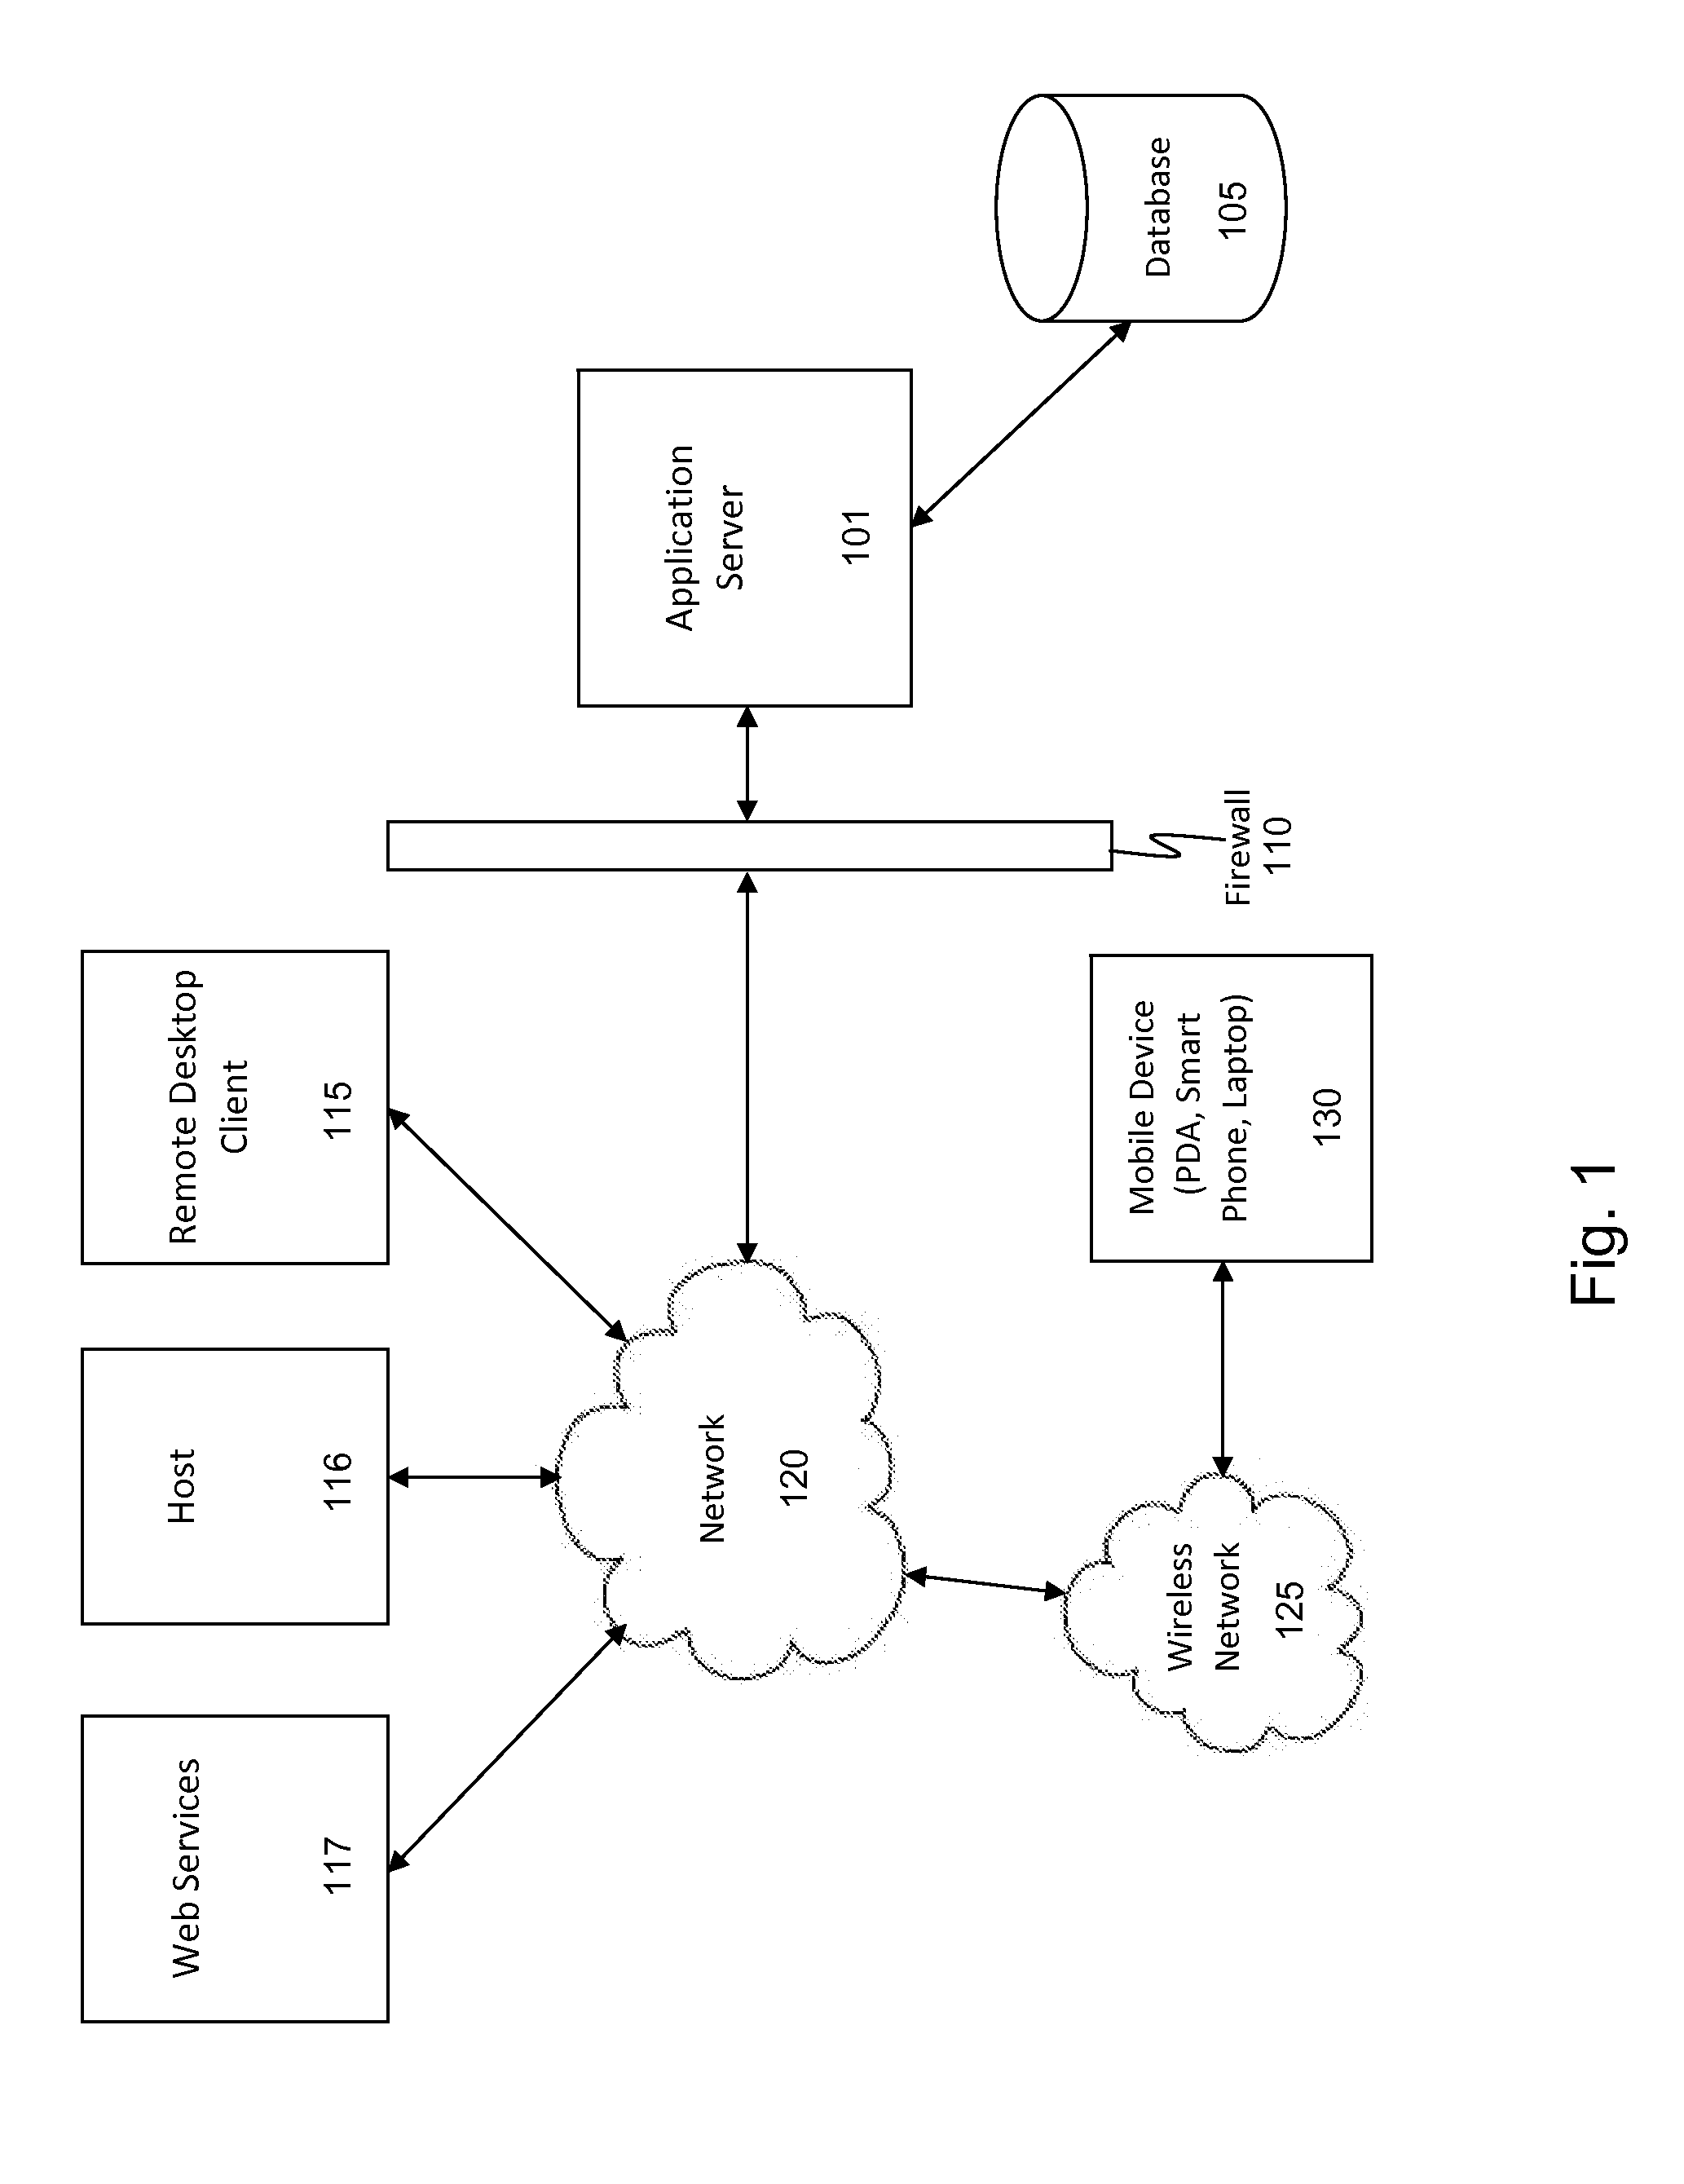 System and method for a configurable and extensible allocation and scheduling tool